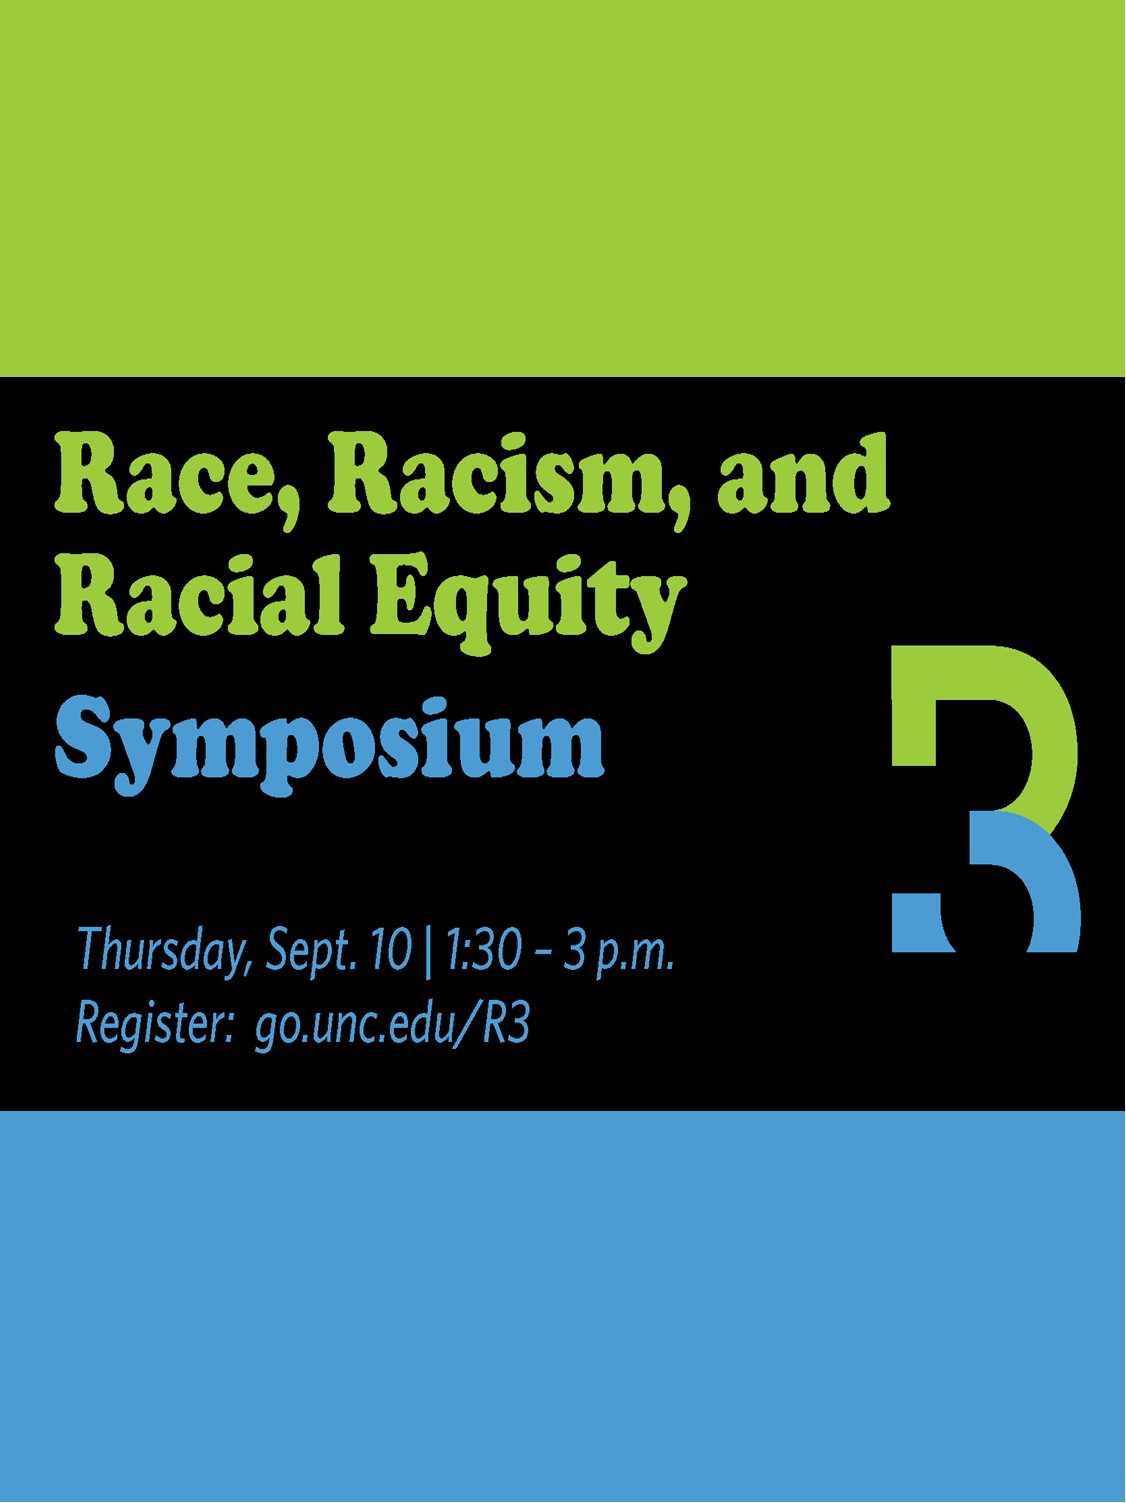 Race Racism and Racial Equity Symposium